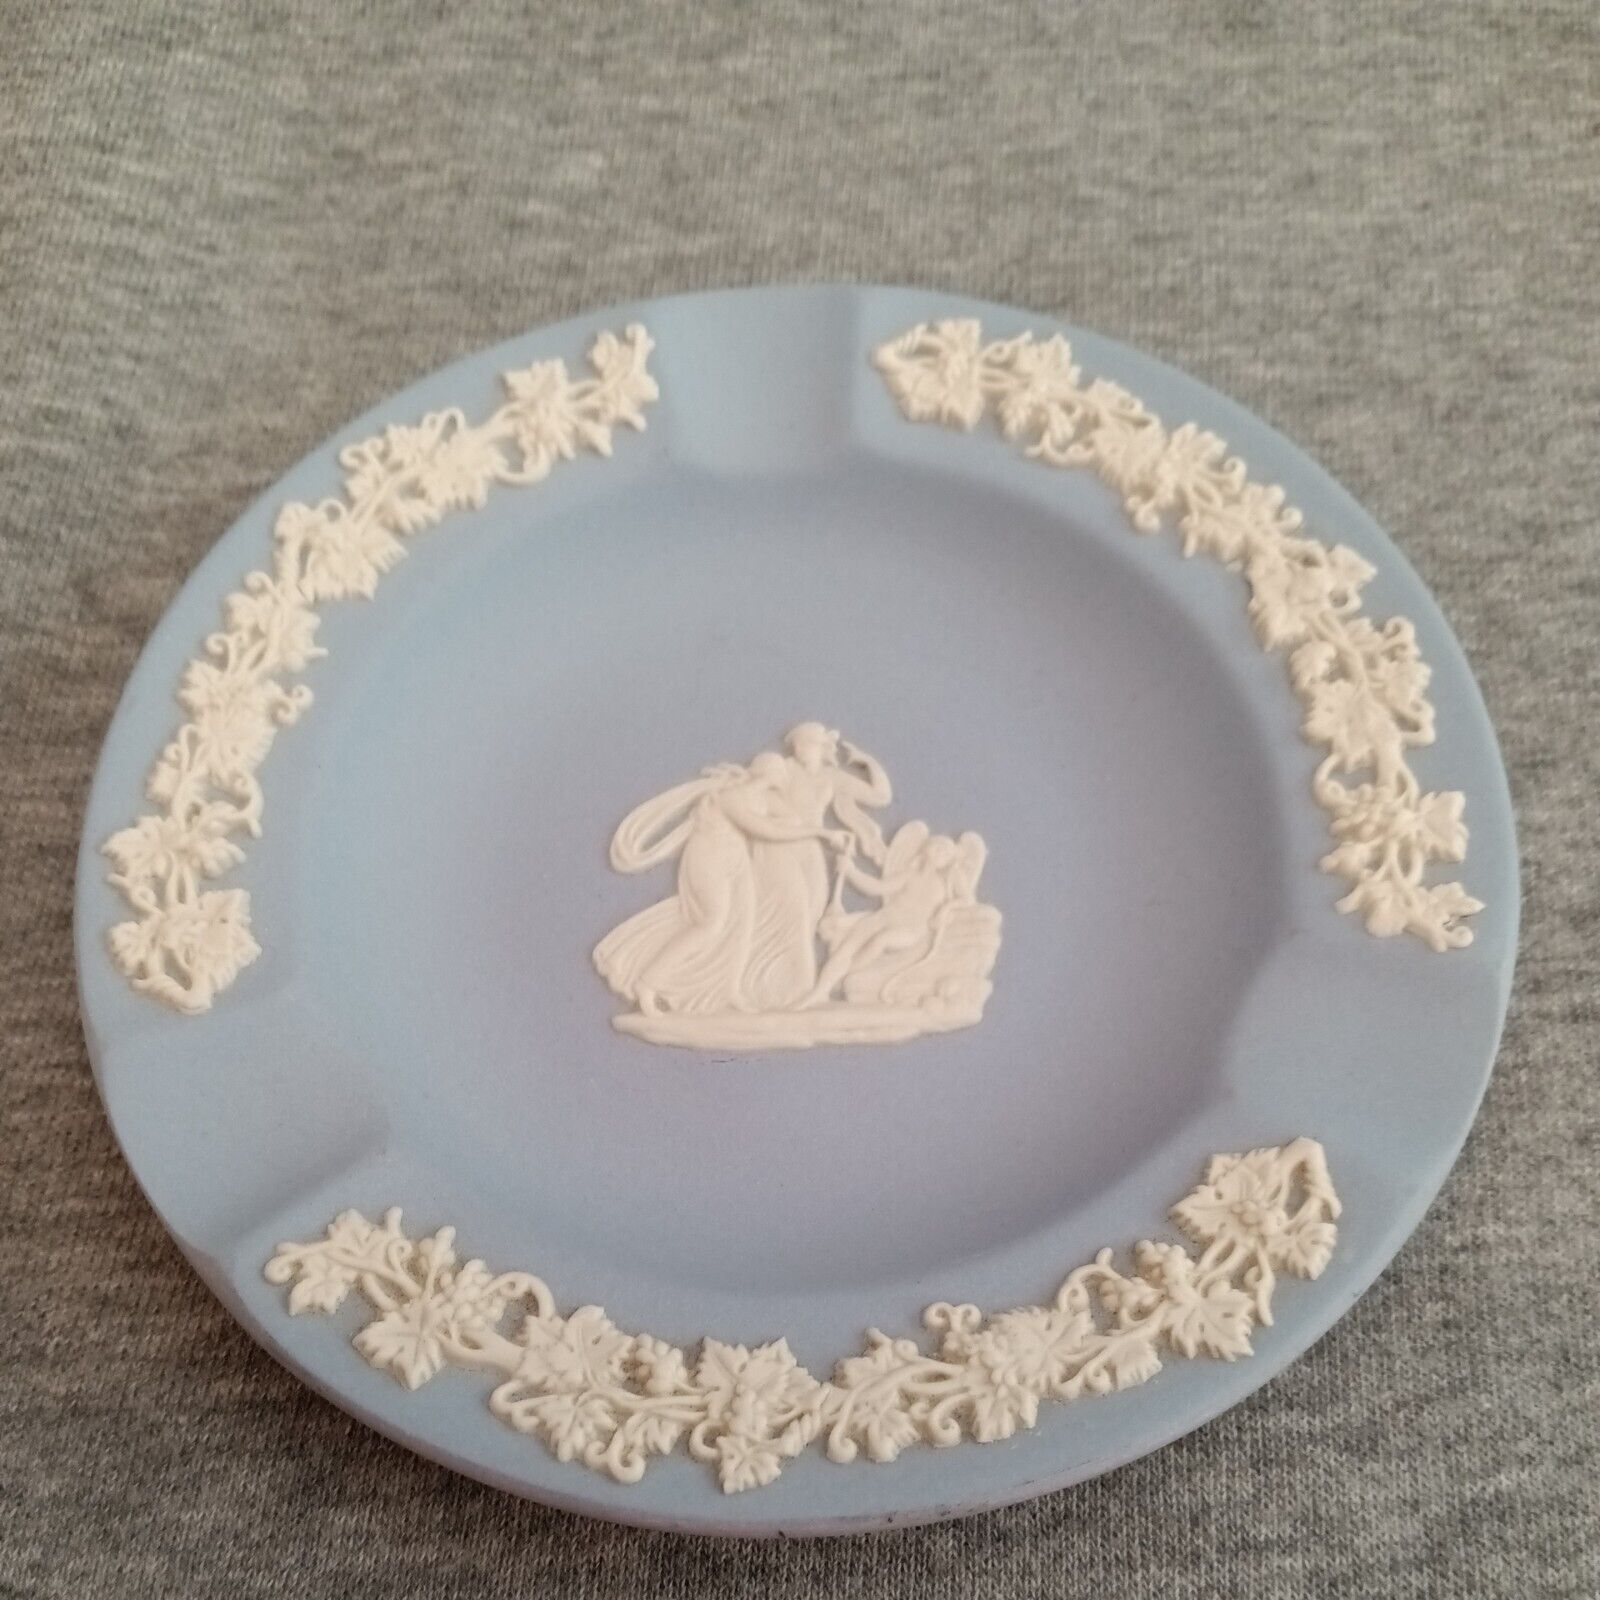 1960s--VINTAGE WEDGWOOD ASH TRAY--MADE IN ENGLAND--NEVER USED--DISPLAY 